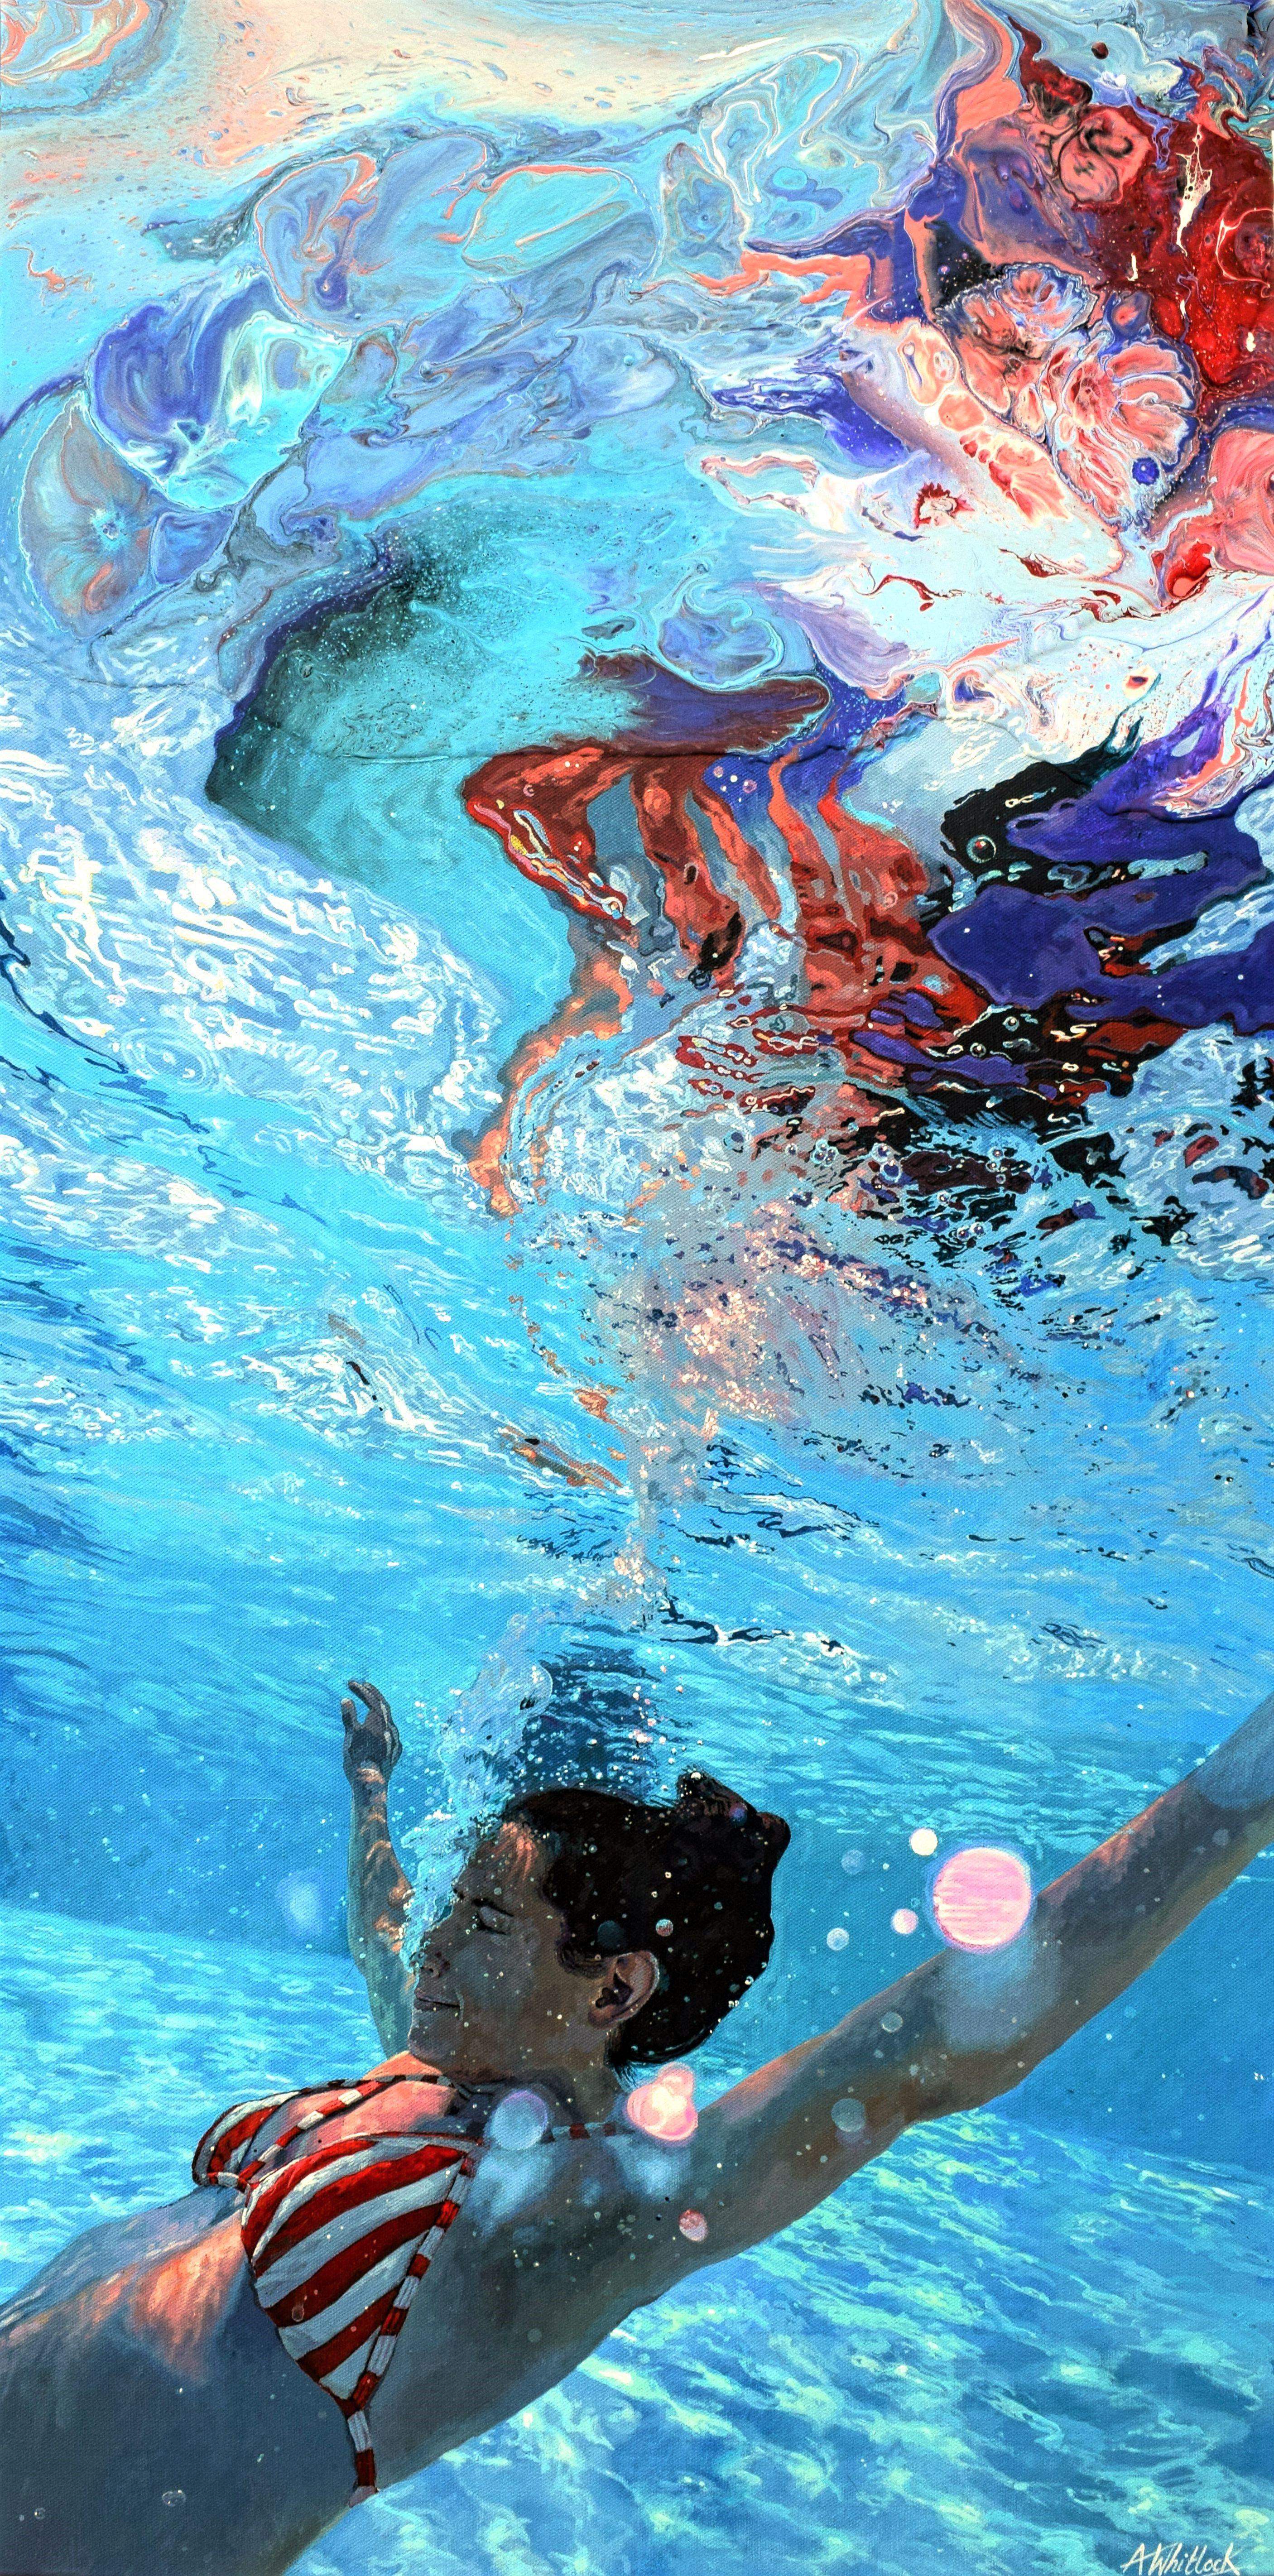 The swimmer sinks down into the water's cool embrace. Above the surface is a riot of intense colour, set a-shimmer with the glow of the late summer sun.    This work is painted on a gallery wrapped, deep edged canvas. The painting continues around